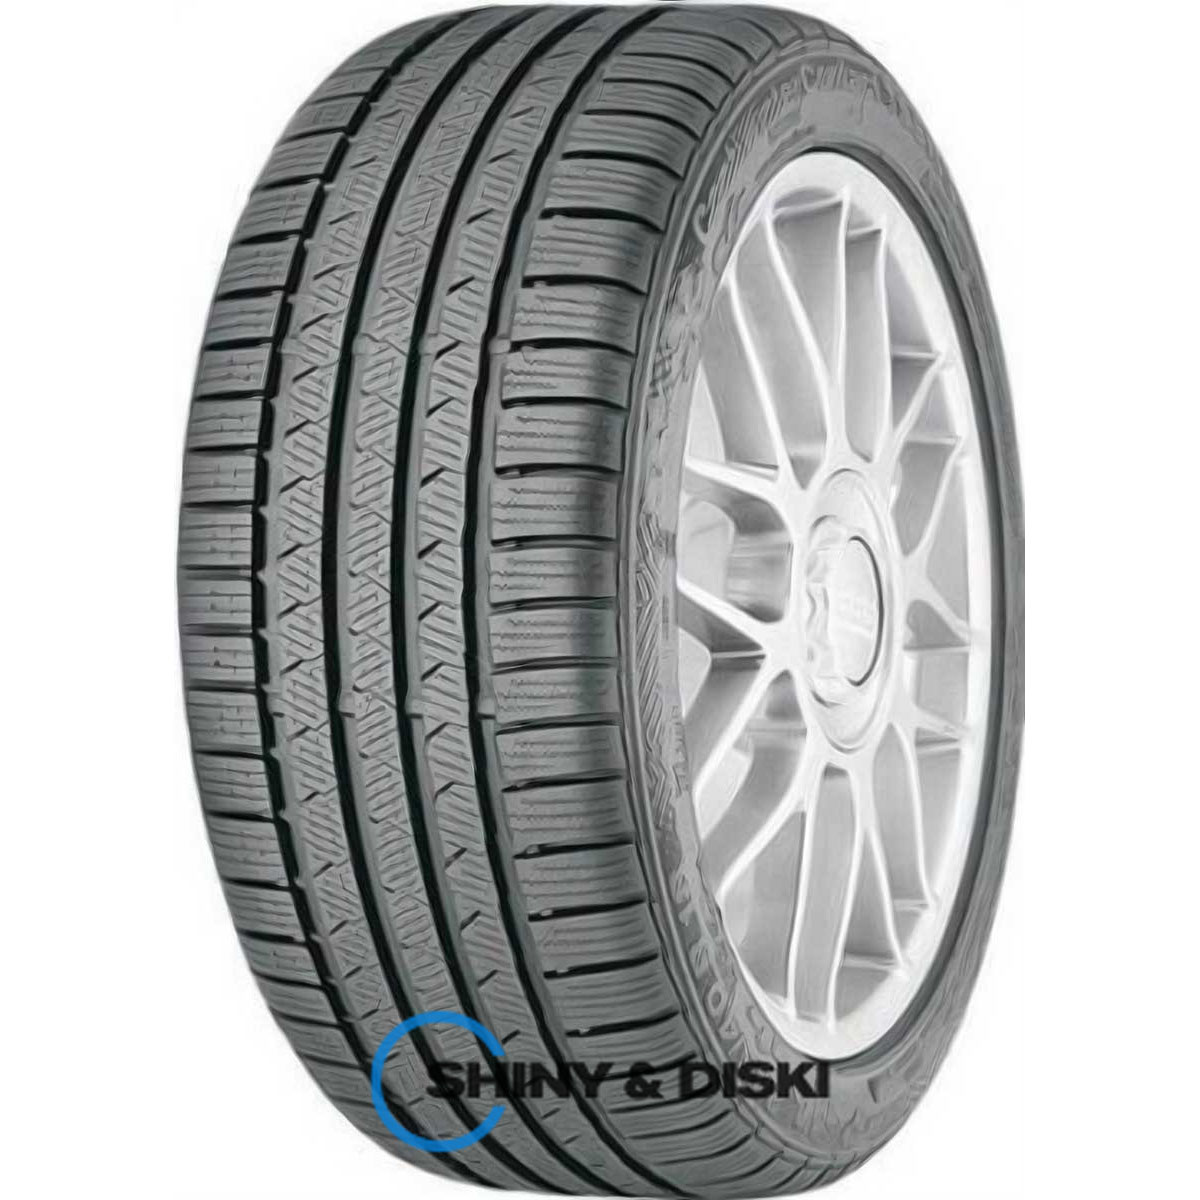 continental contiwintercontact ts 810 sport 225/50 r17 94h